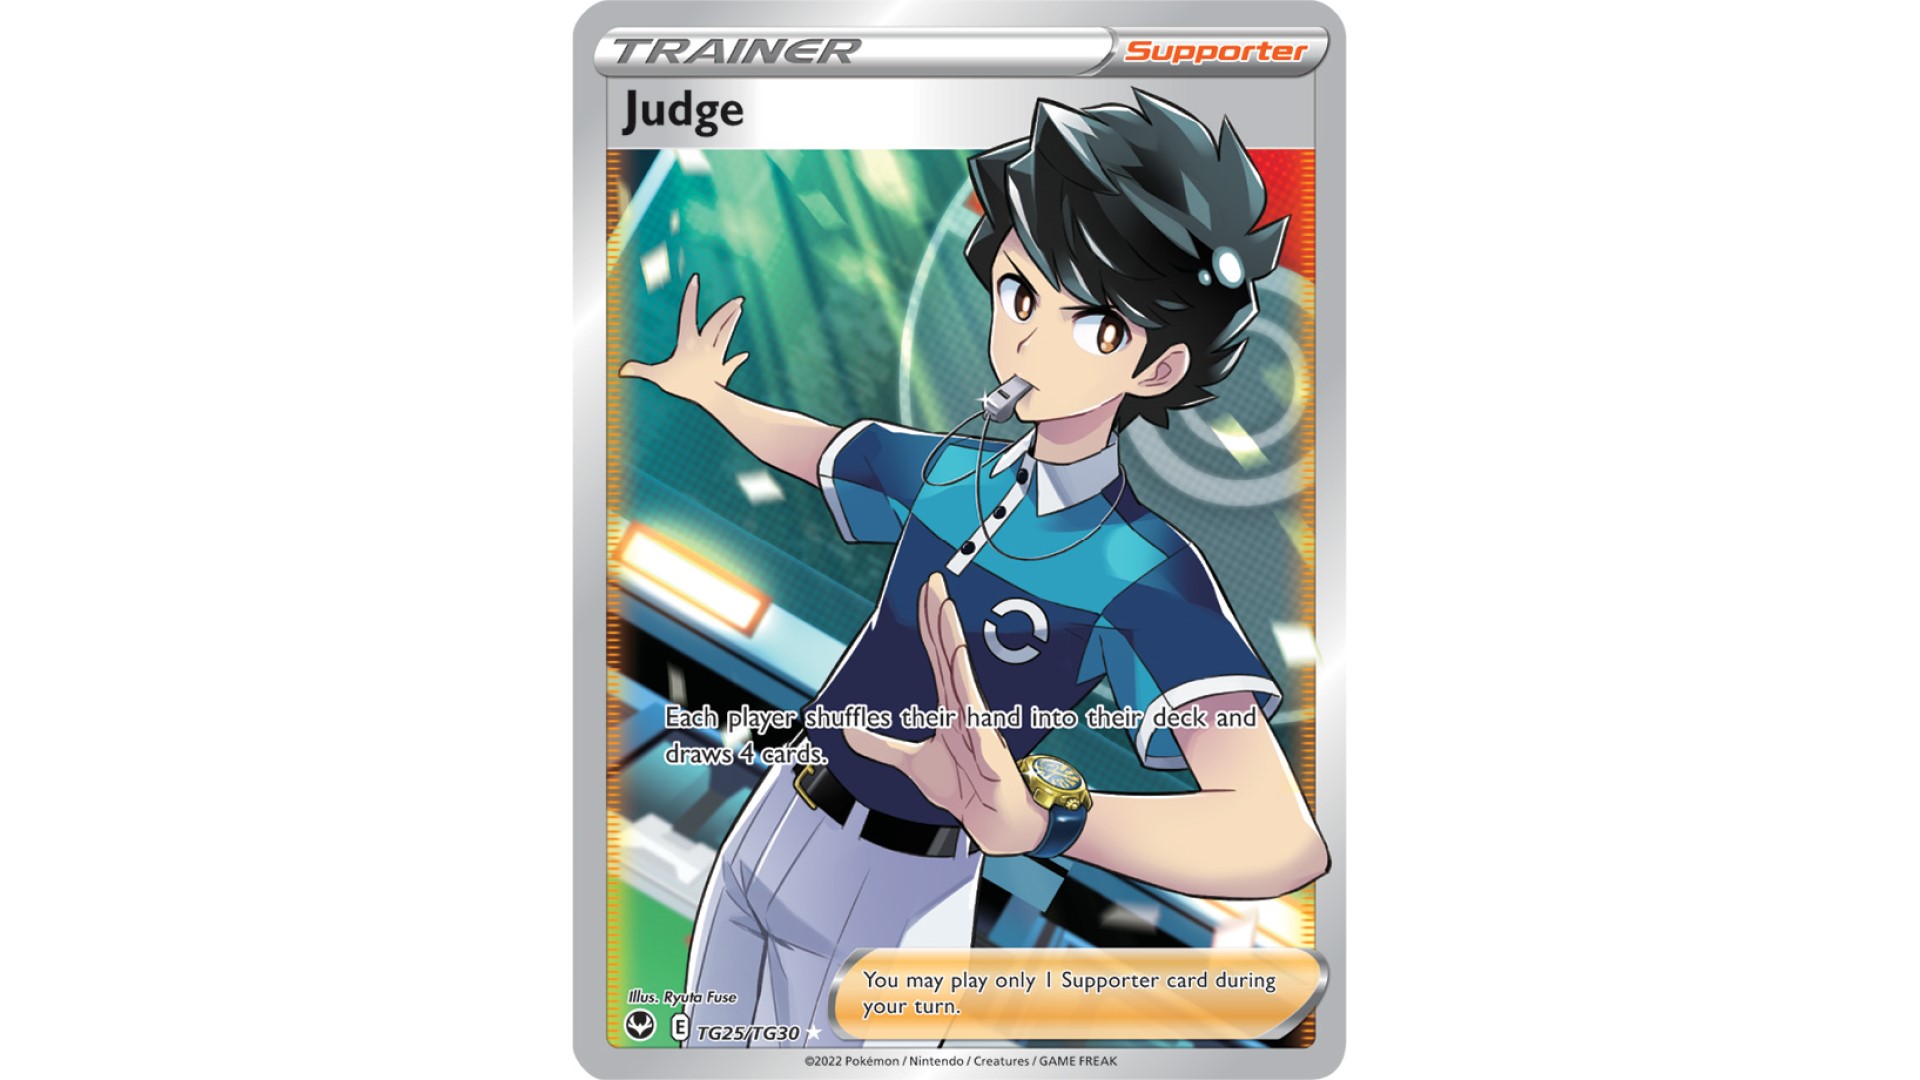 Why do many Pokemon trading cards have different types than are